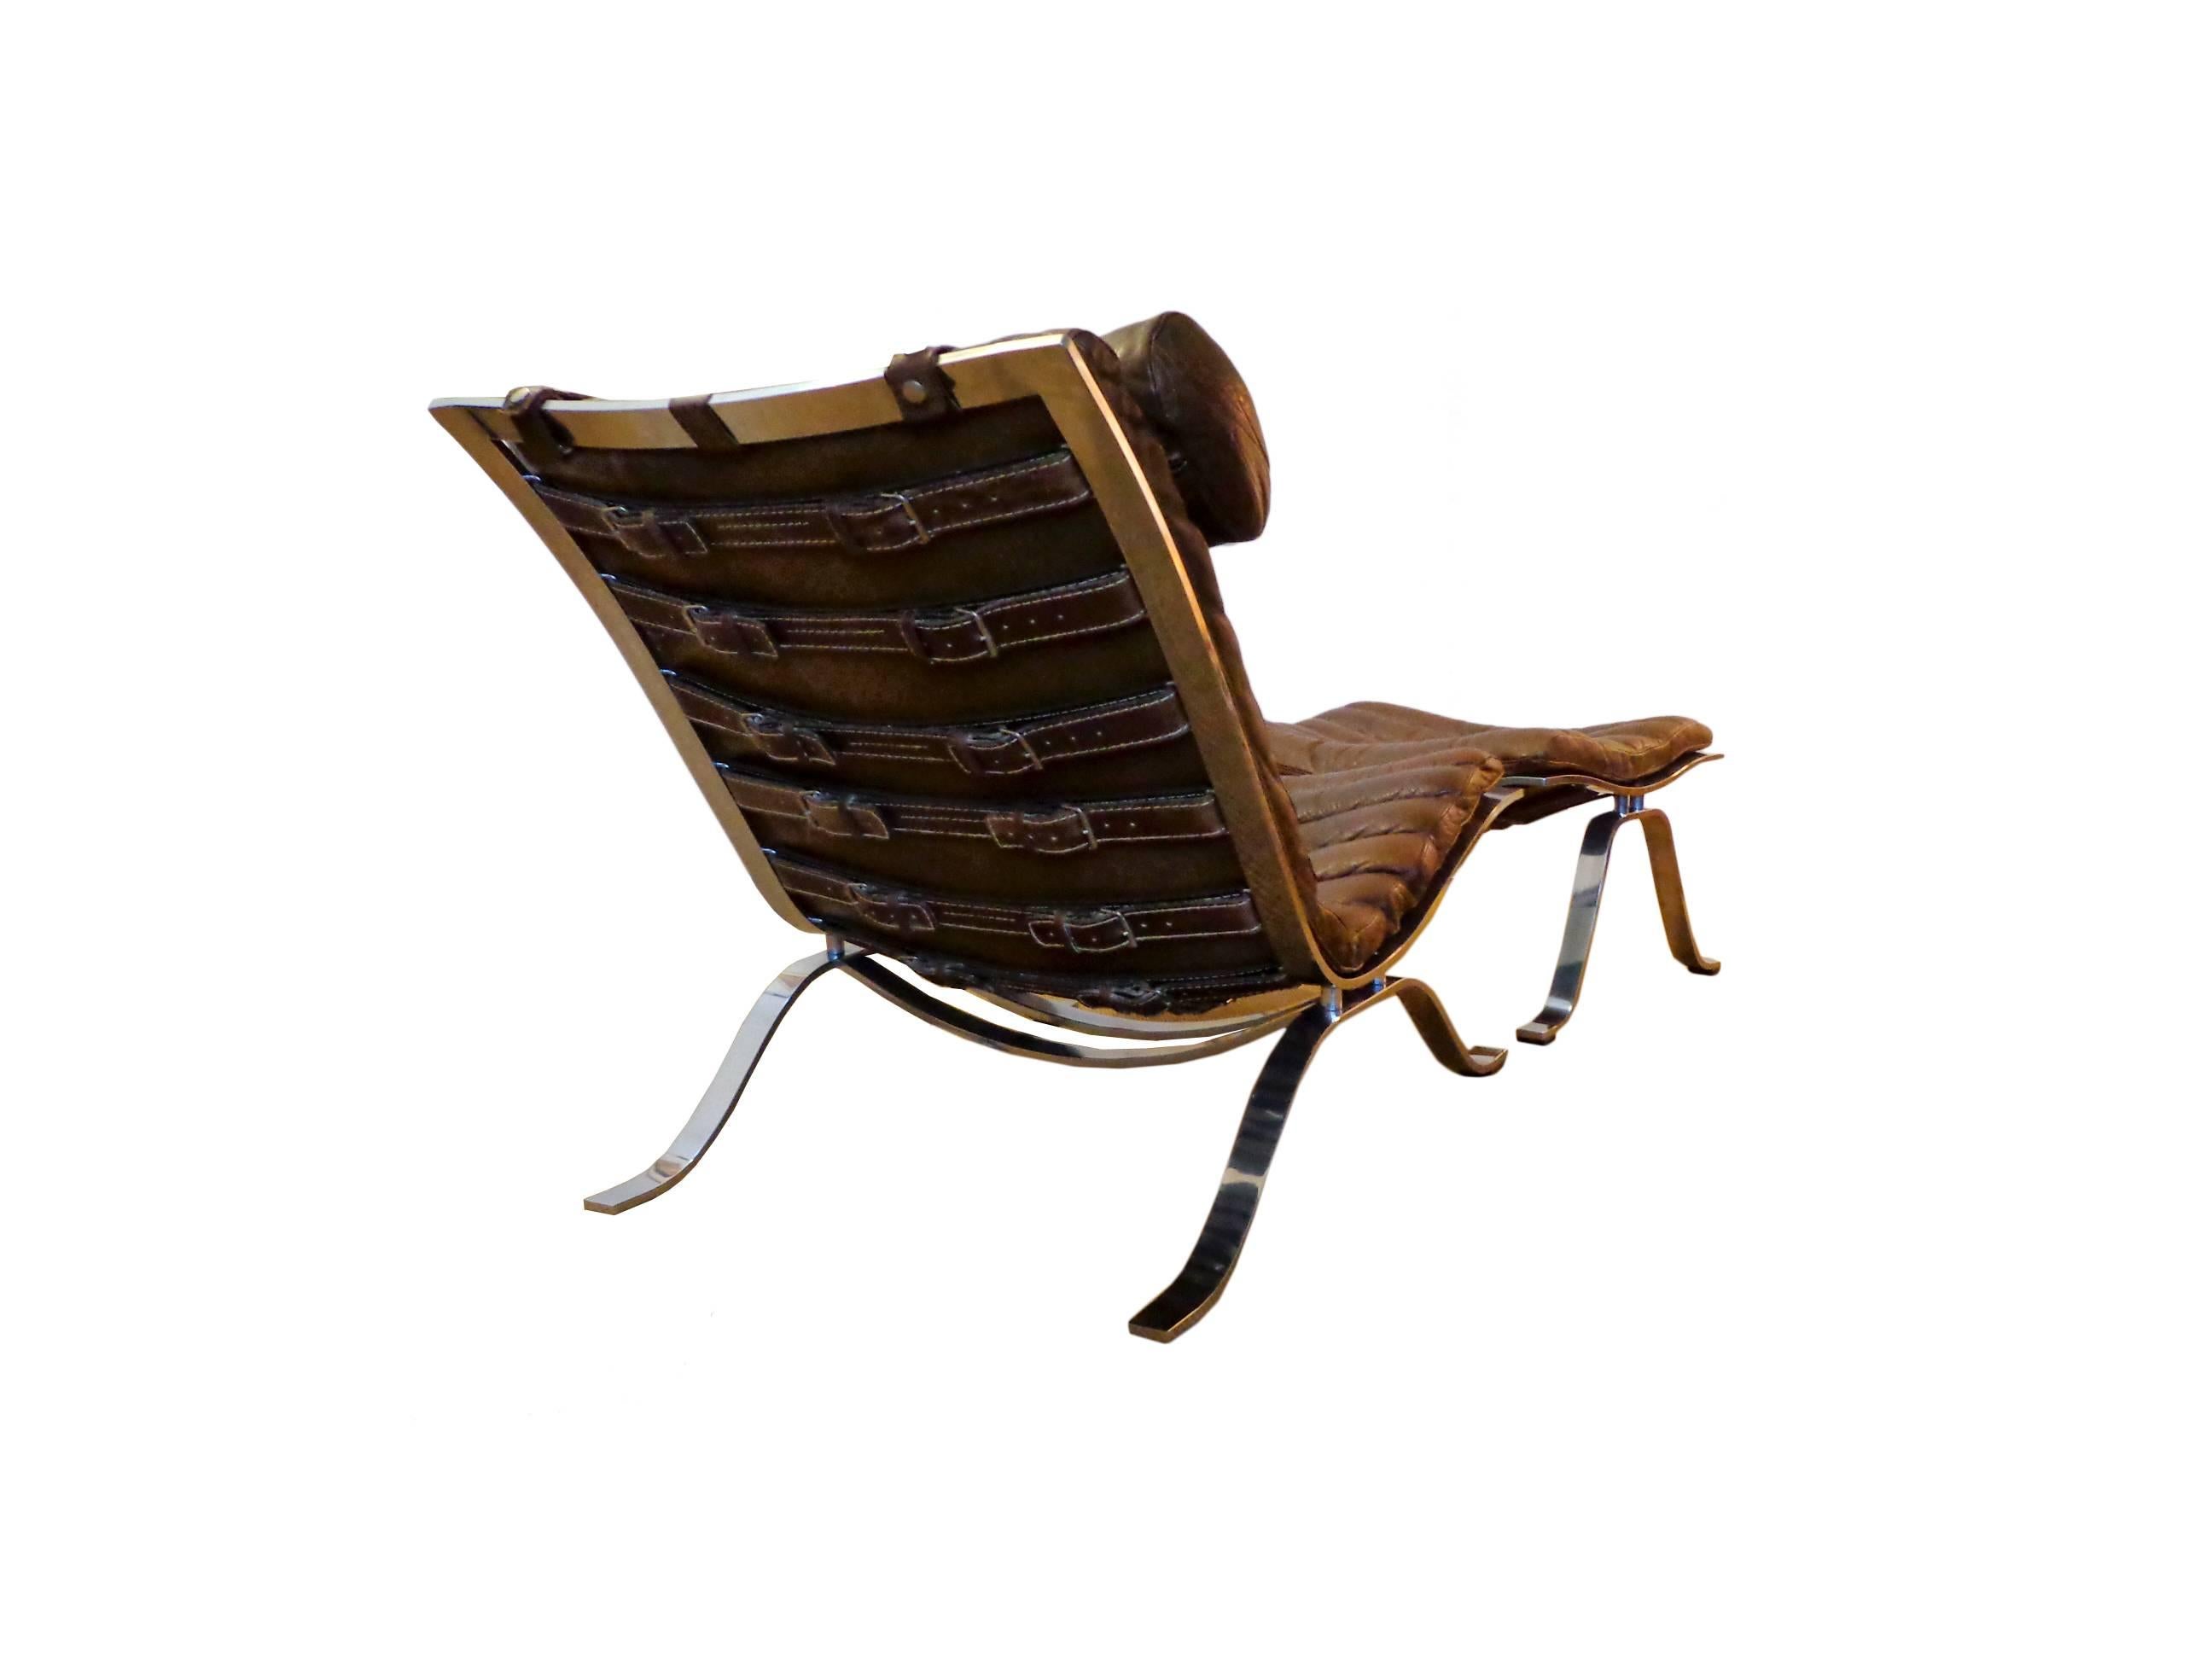 Offerd by Zitzo, Amsterdam: Comfortable lounge chair with ottoman designed by Arne Norell. This award winning lounge chair was made of high quality flat chrome-plated steel and has very thick original cognac/brown buffalo leather. The set is in